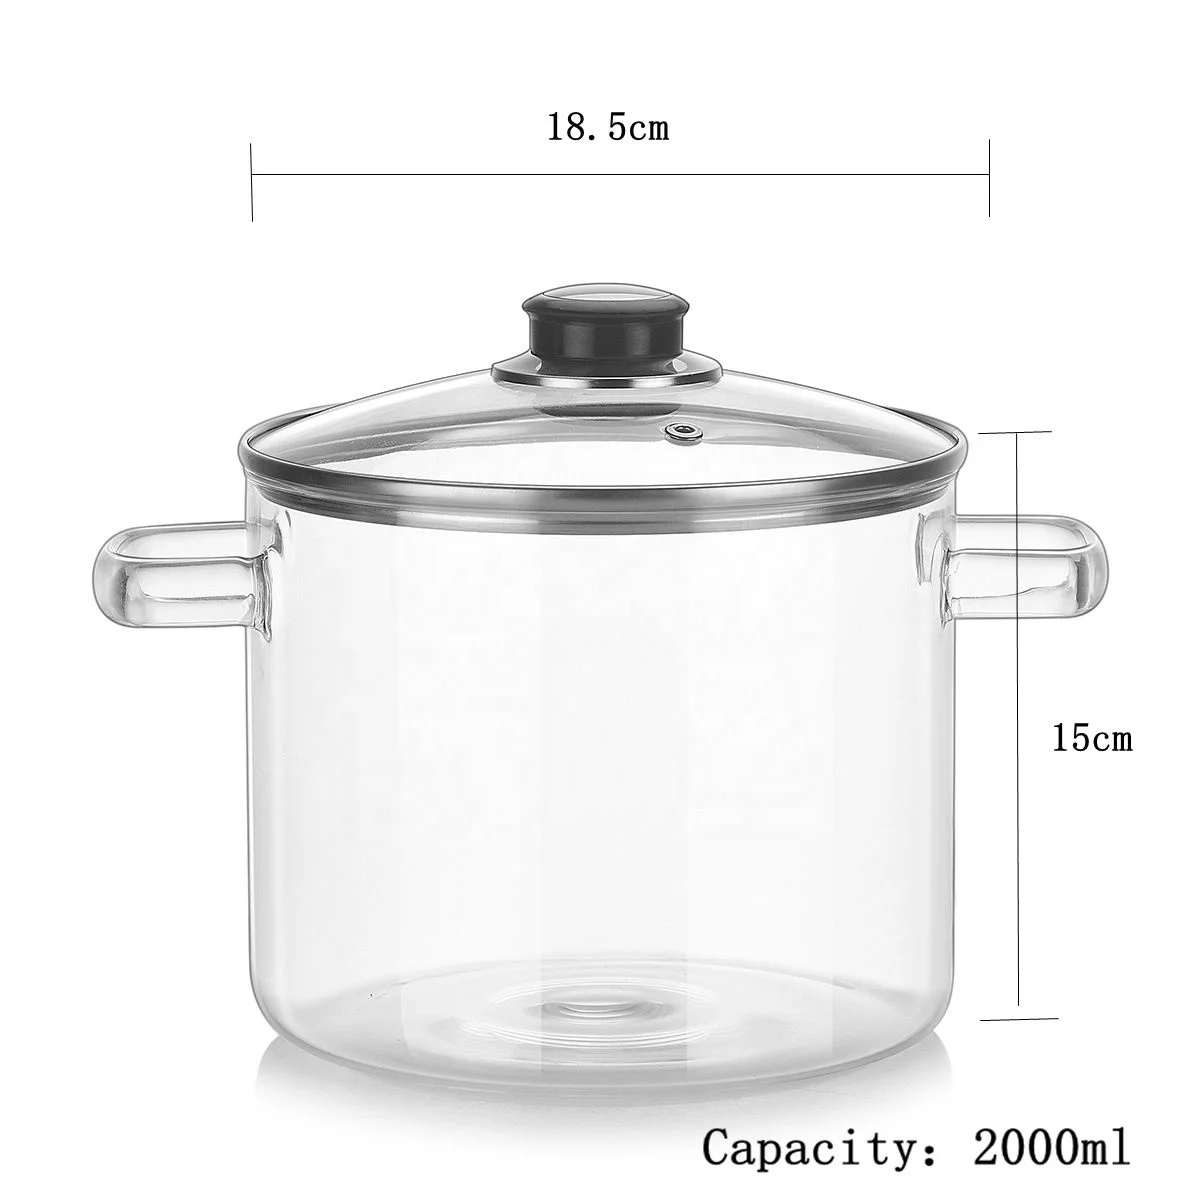 
2020 Amazon Glass Saucepan 2.0 Liter - Heat Resistant Glass Cooking Pot with Lid Sauce Pan for Soup, Pasta & Baby Food 